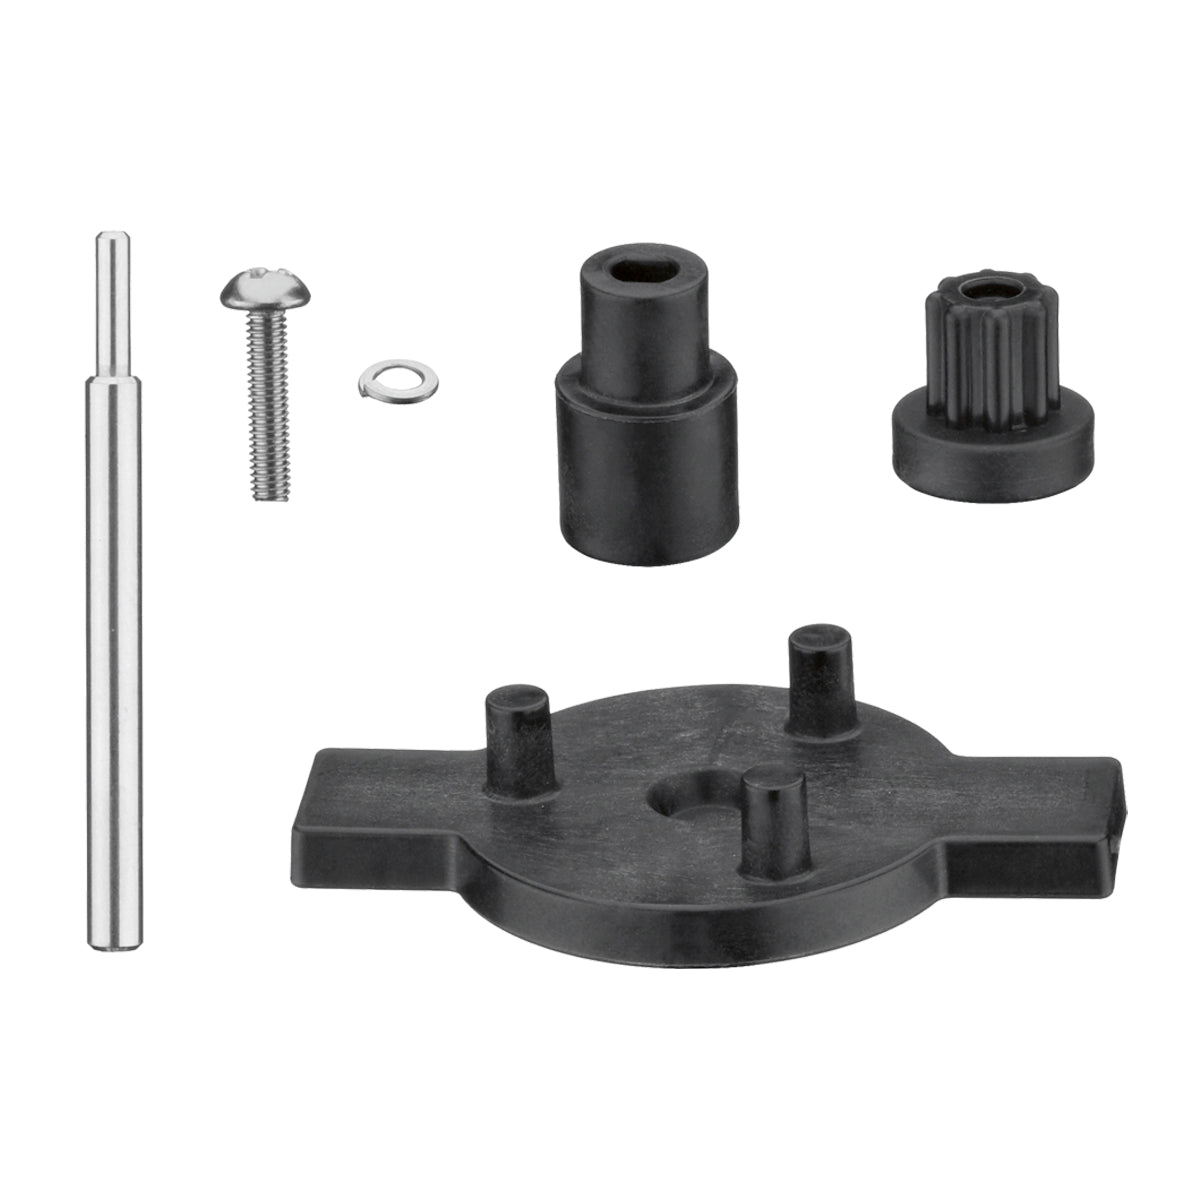 CAC104 - Coupling Replacement Kit for Heavy-Duty Big Stix